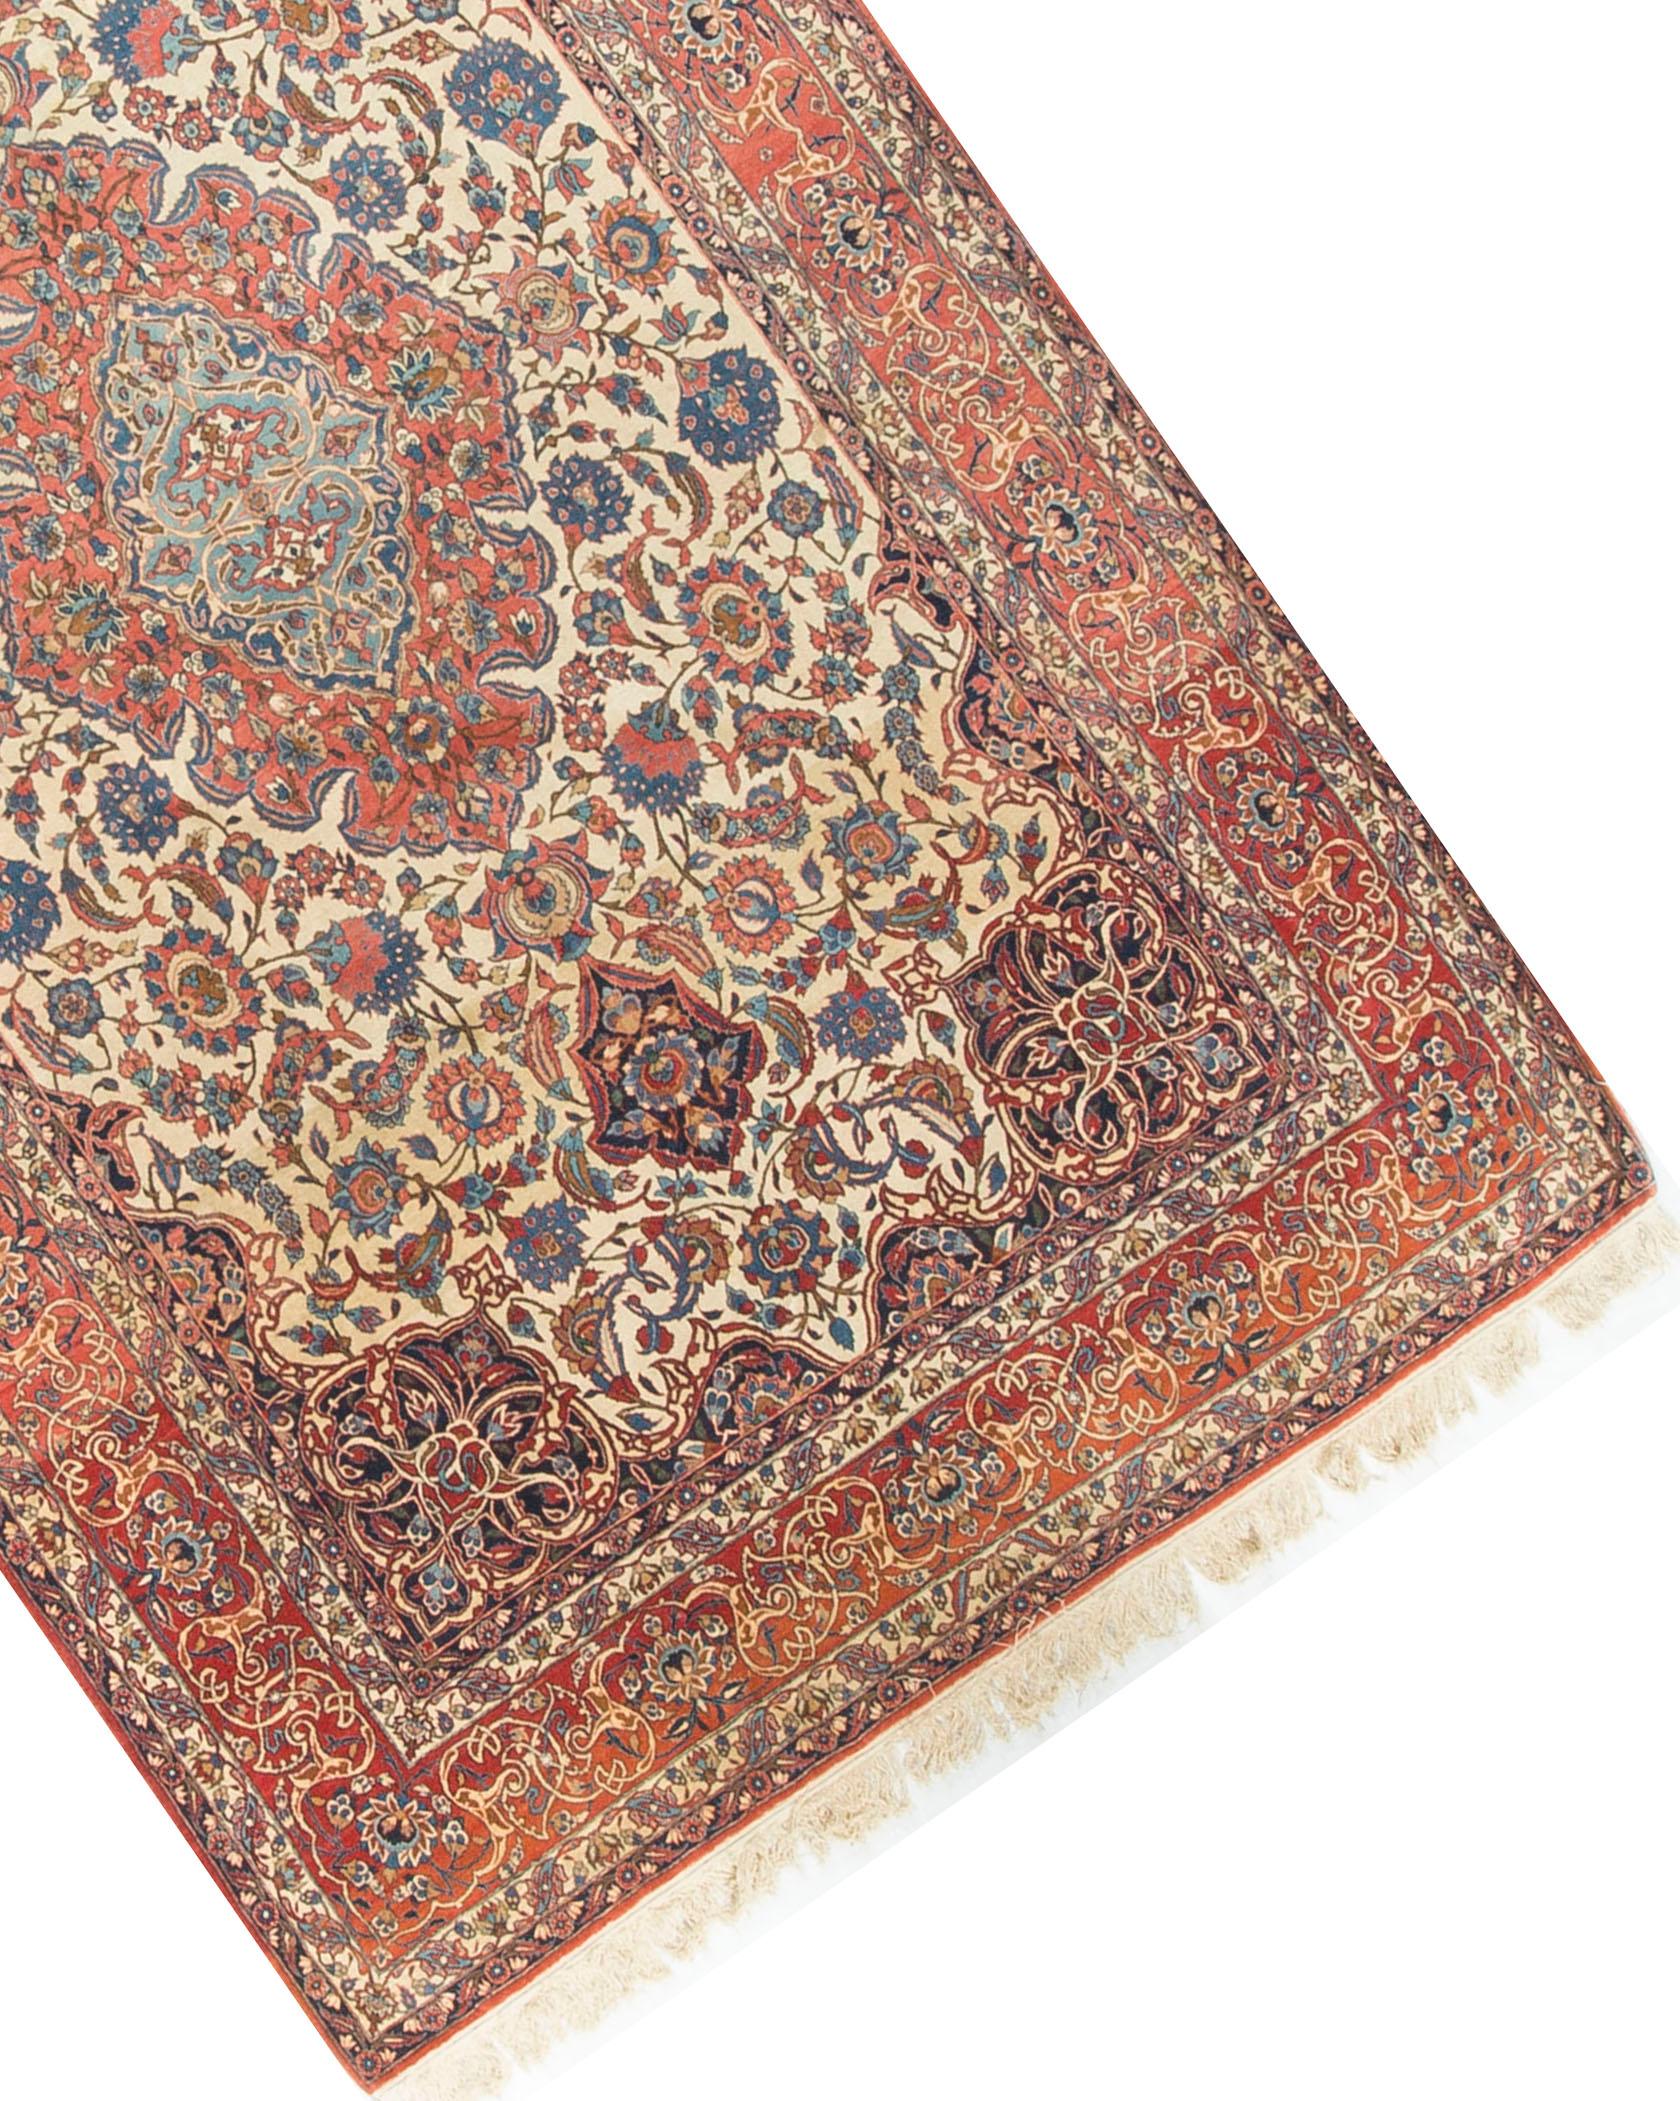 Antique Persian Isfahan Rug, circa 1900 In Excellent Condition For Sale In Secaucus, NJ